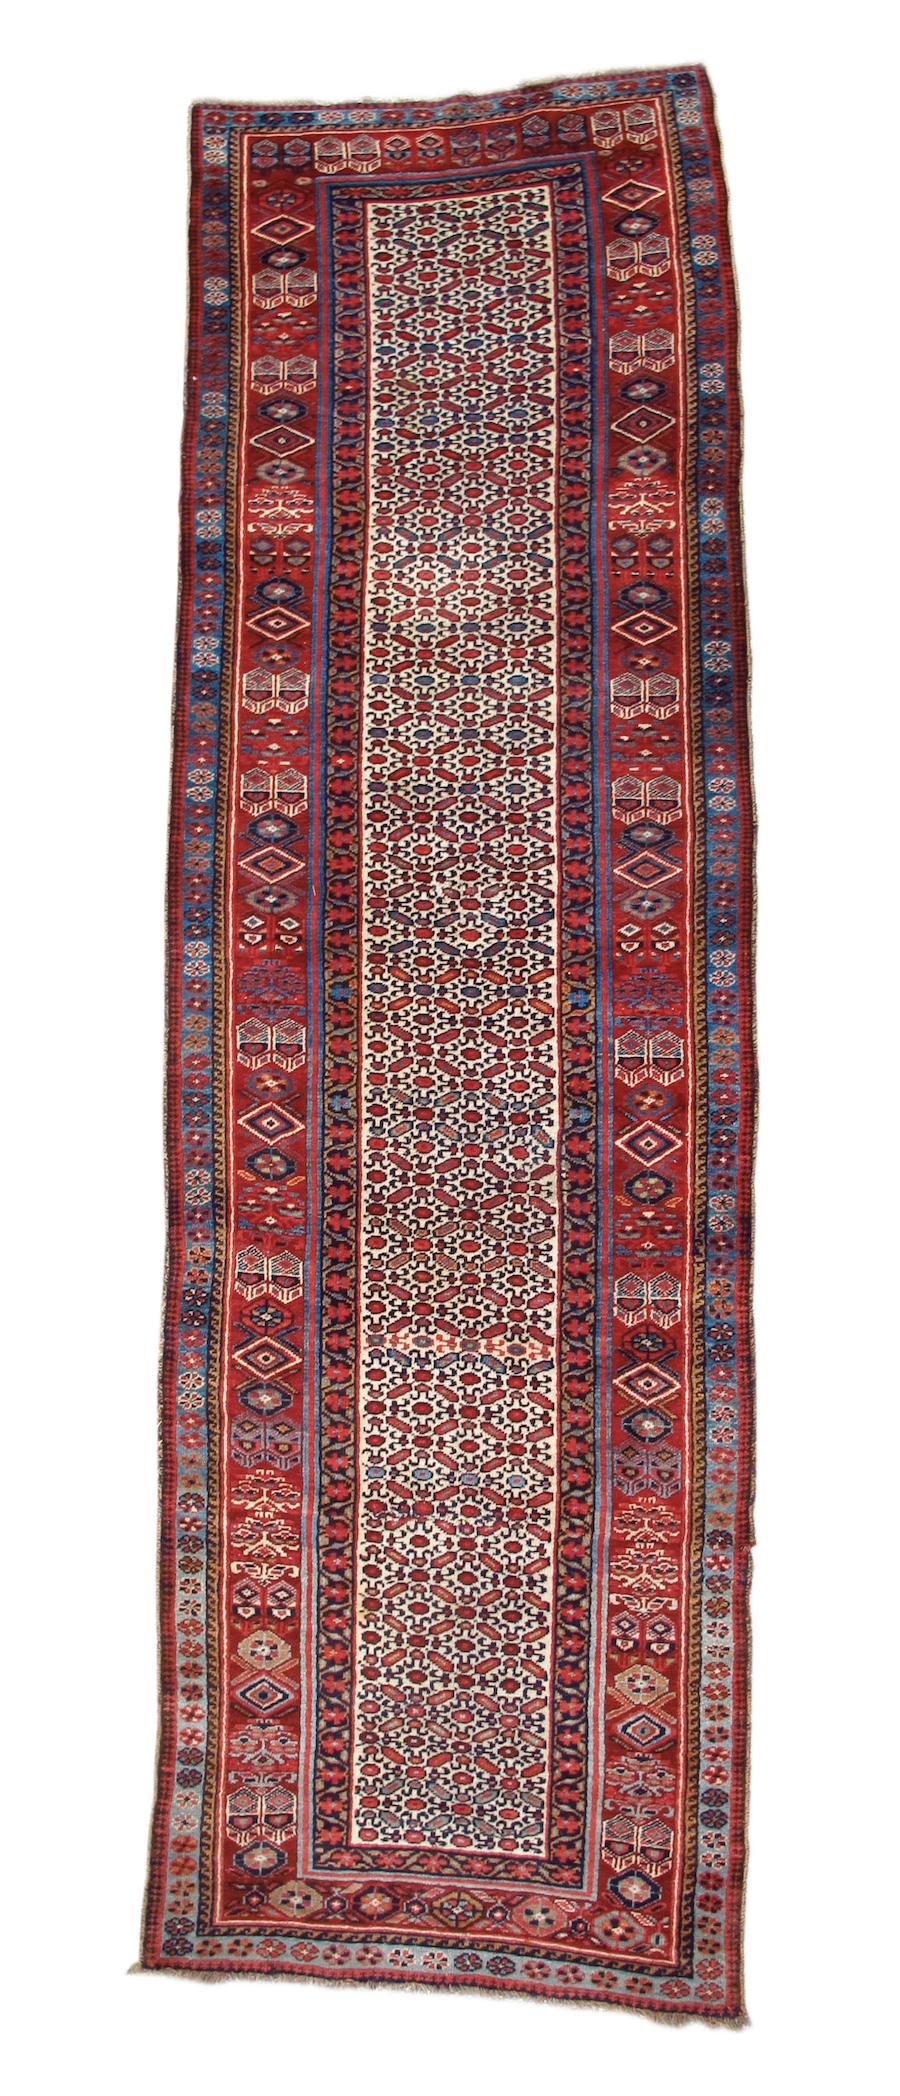 Antique Northwest Persian Long Runner Rug, 19th Century

Woven with a white field using an over-all repeat lattice, this Northwest Persian runner almost looks like a large saddle-bag— drawing on the rich color and distinctive patterns of Kurdish